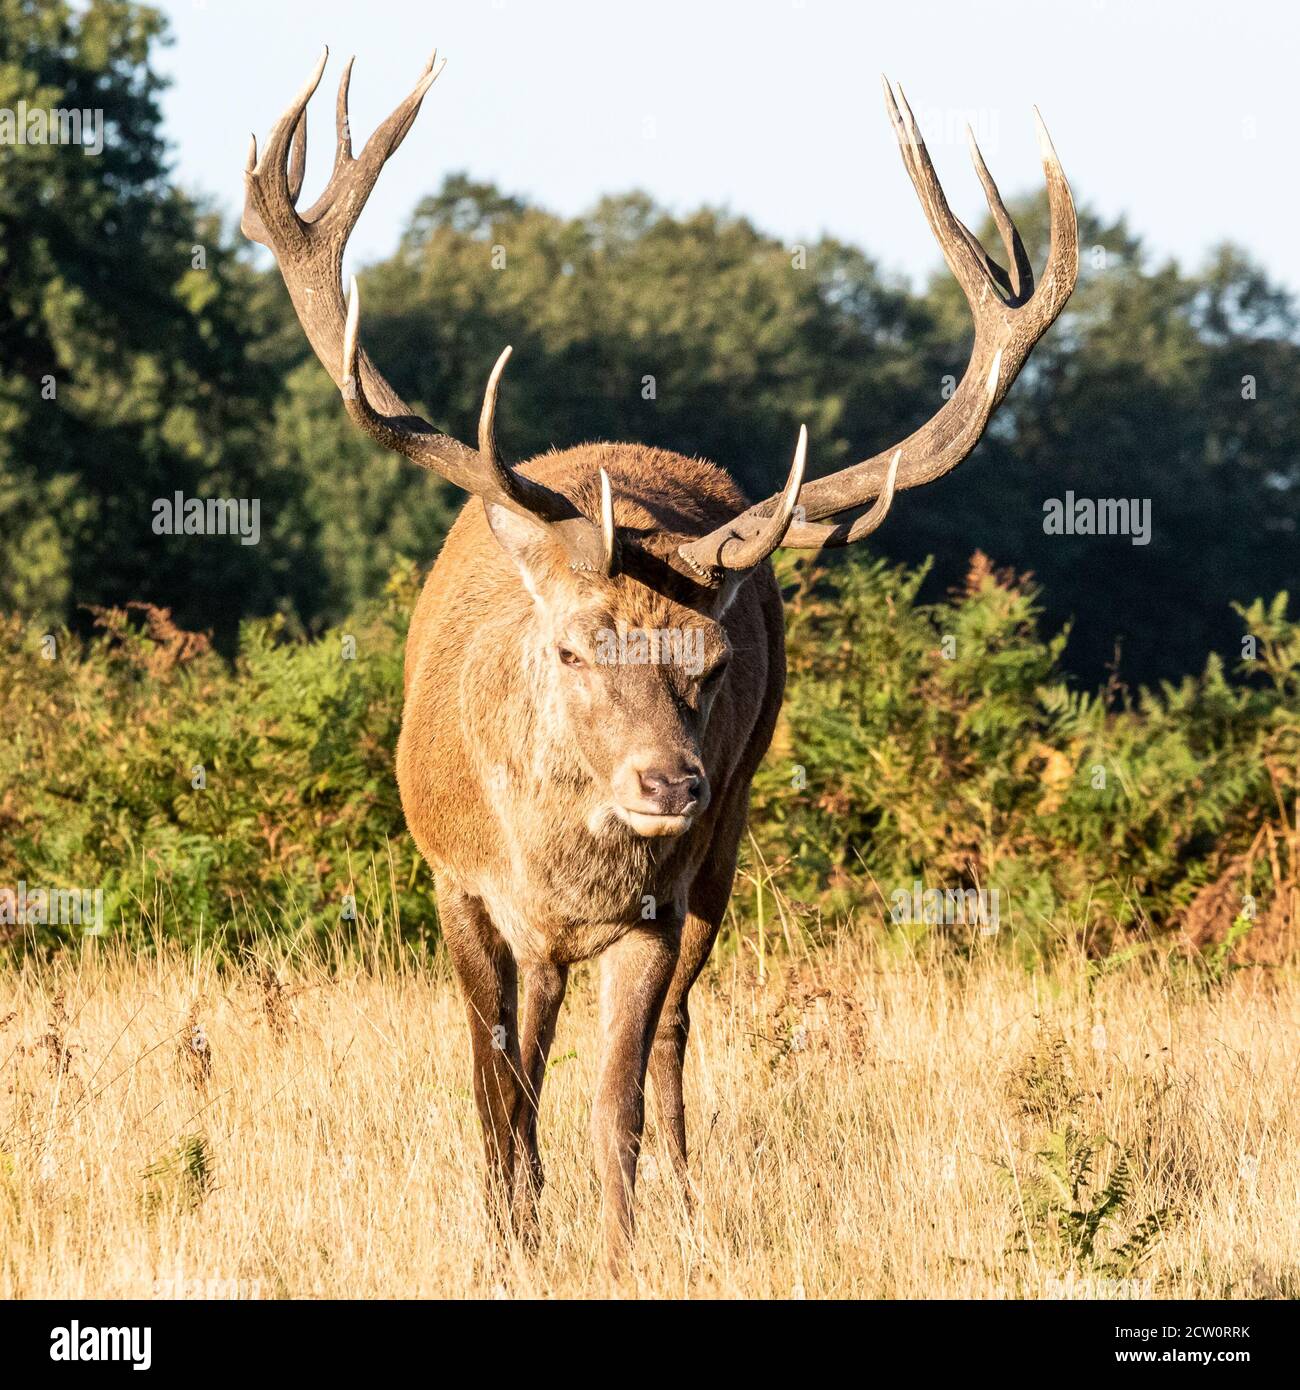 A moody looking red deer stag skulks out of the bracken and into the harsh sunlight of late summer, in Bushy Park, West London Stock Photo